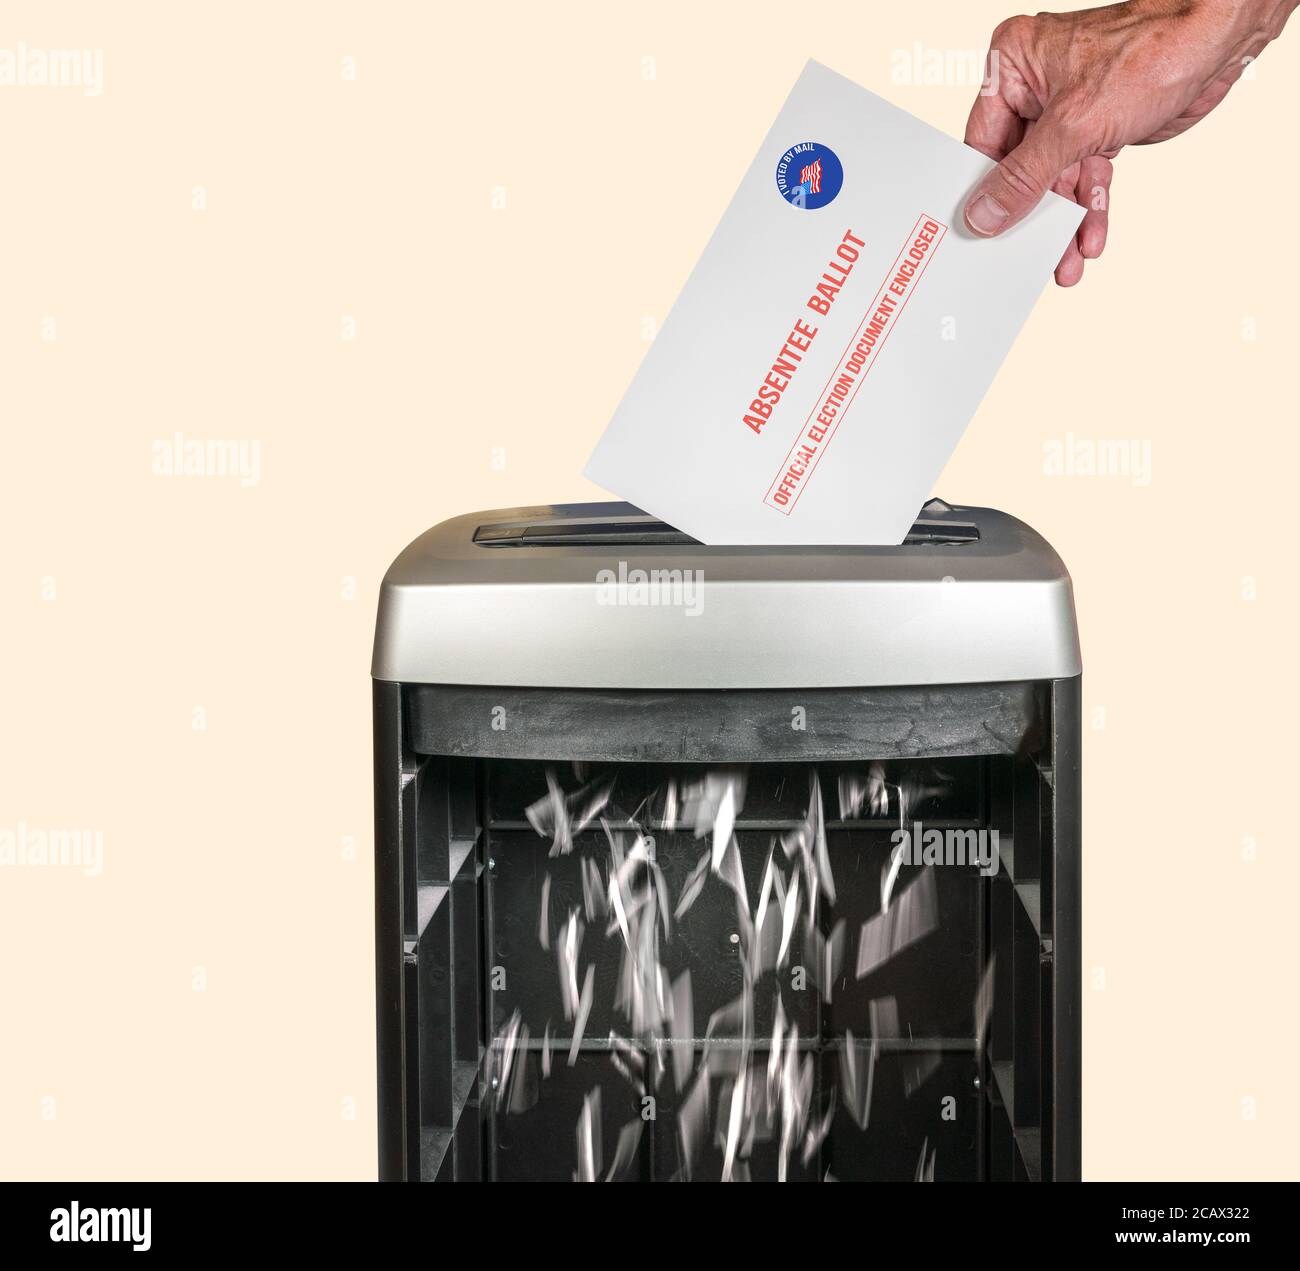 Absentee ballot voteing by mail envelope being shredded in office paper shredder as concept for voting fraud or lost votes in Presidential election Stock Photo